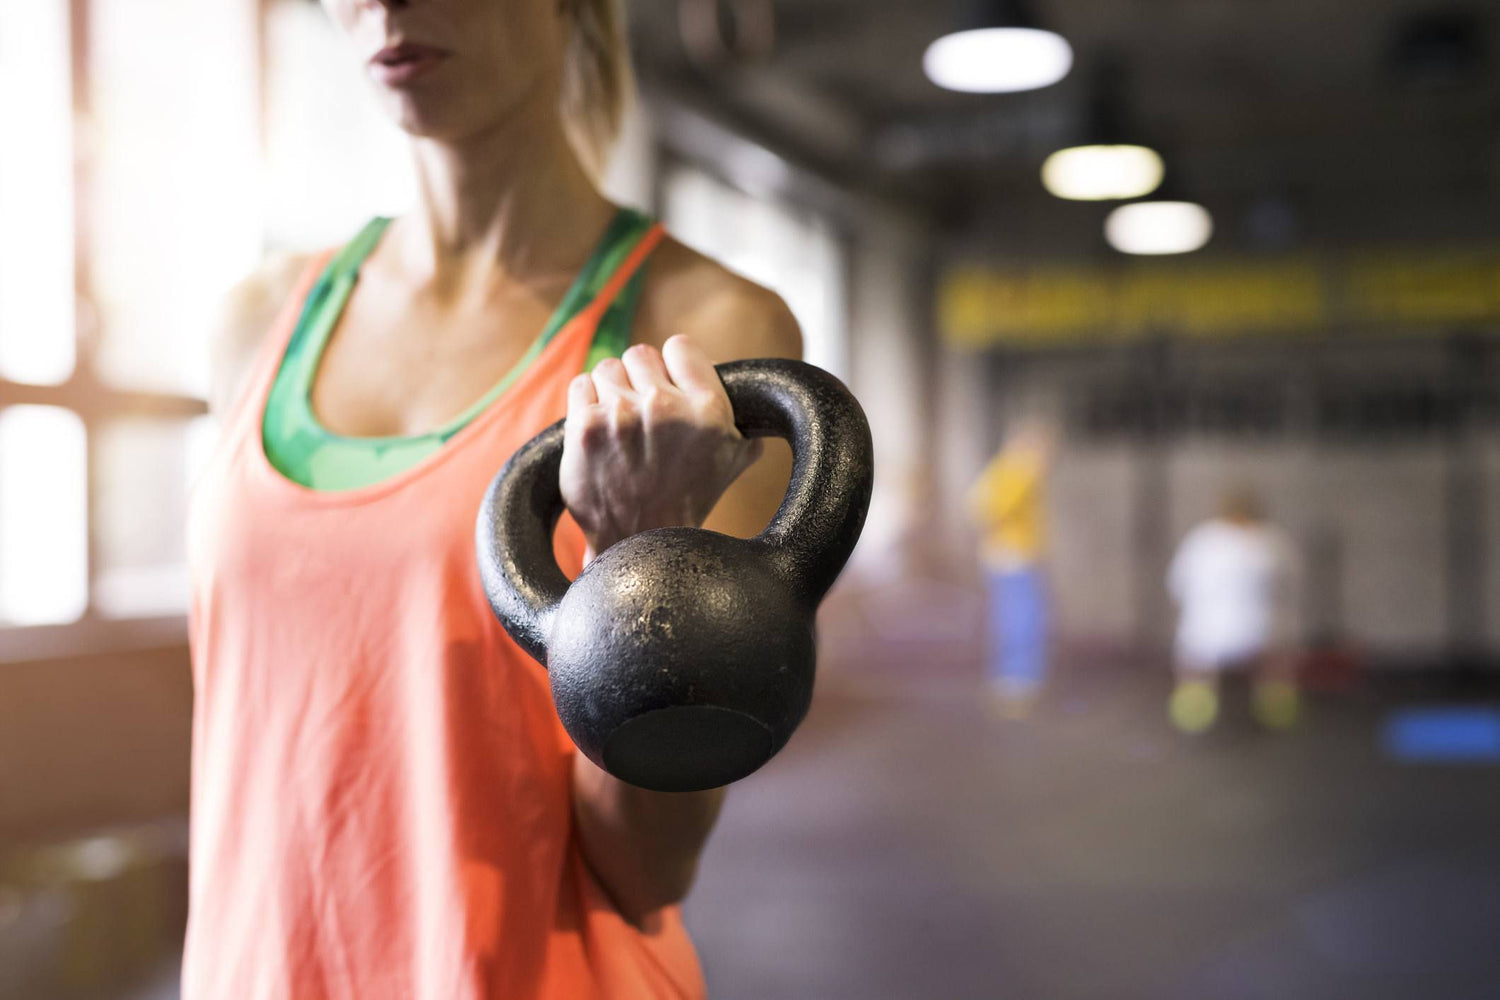 Kettlebell Injuries: How to Avoid during Workout